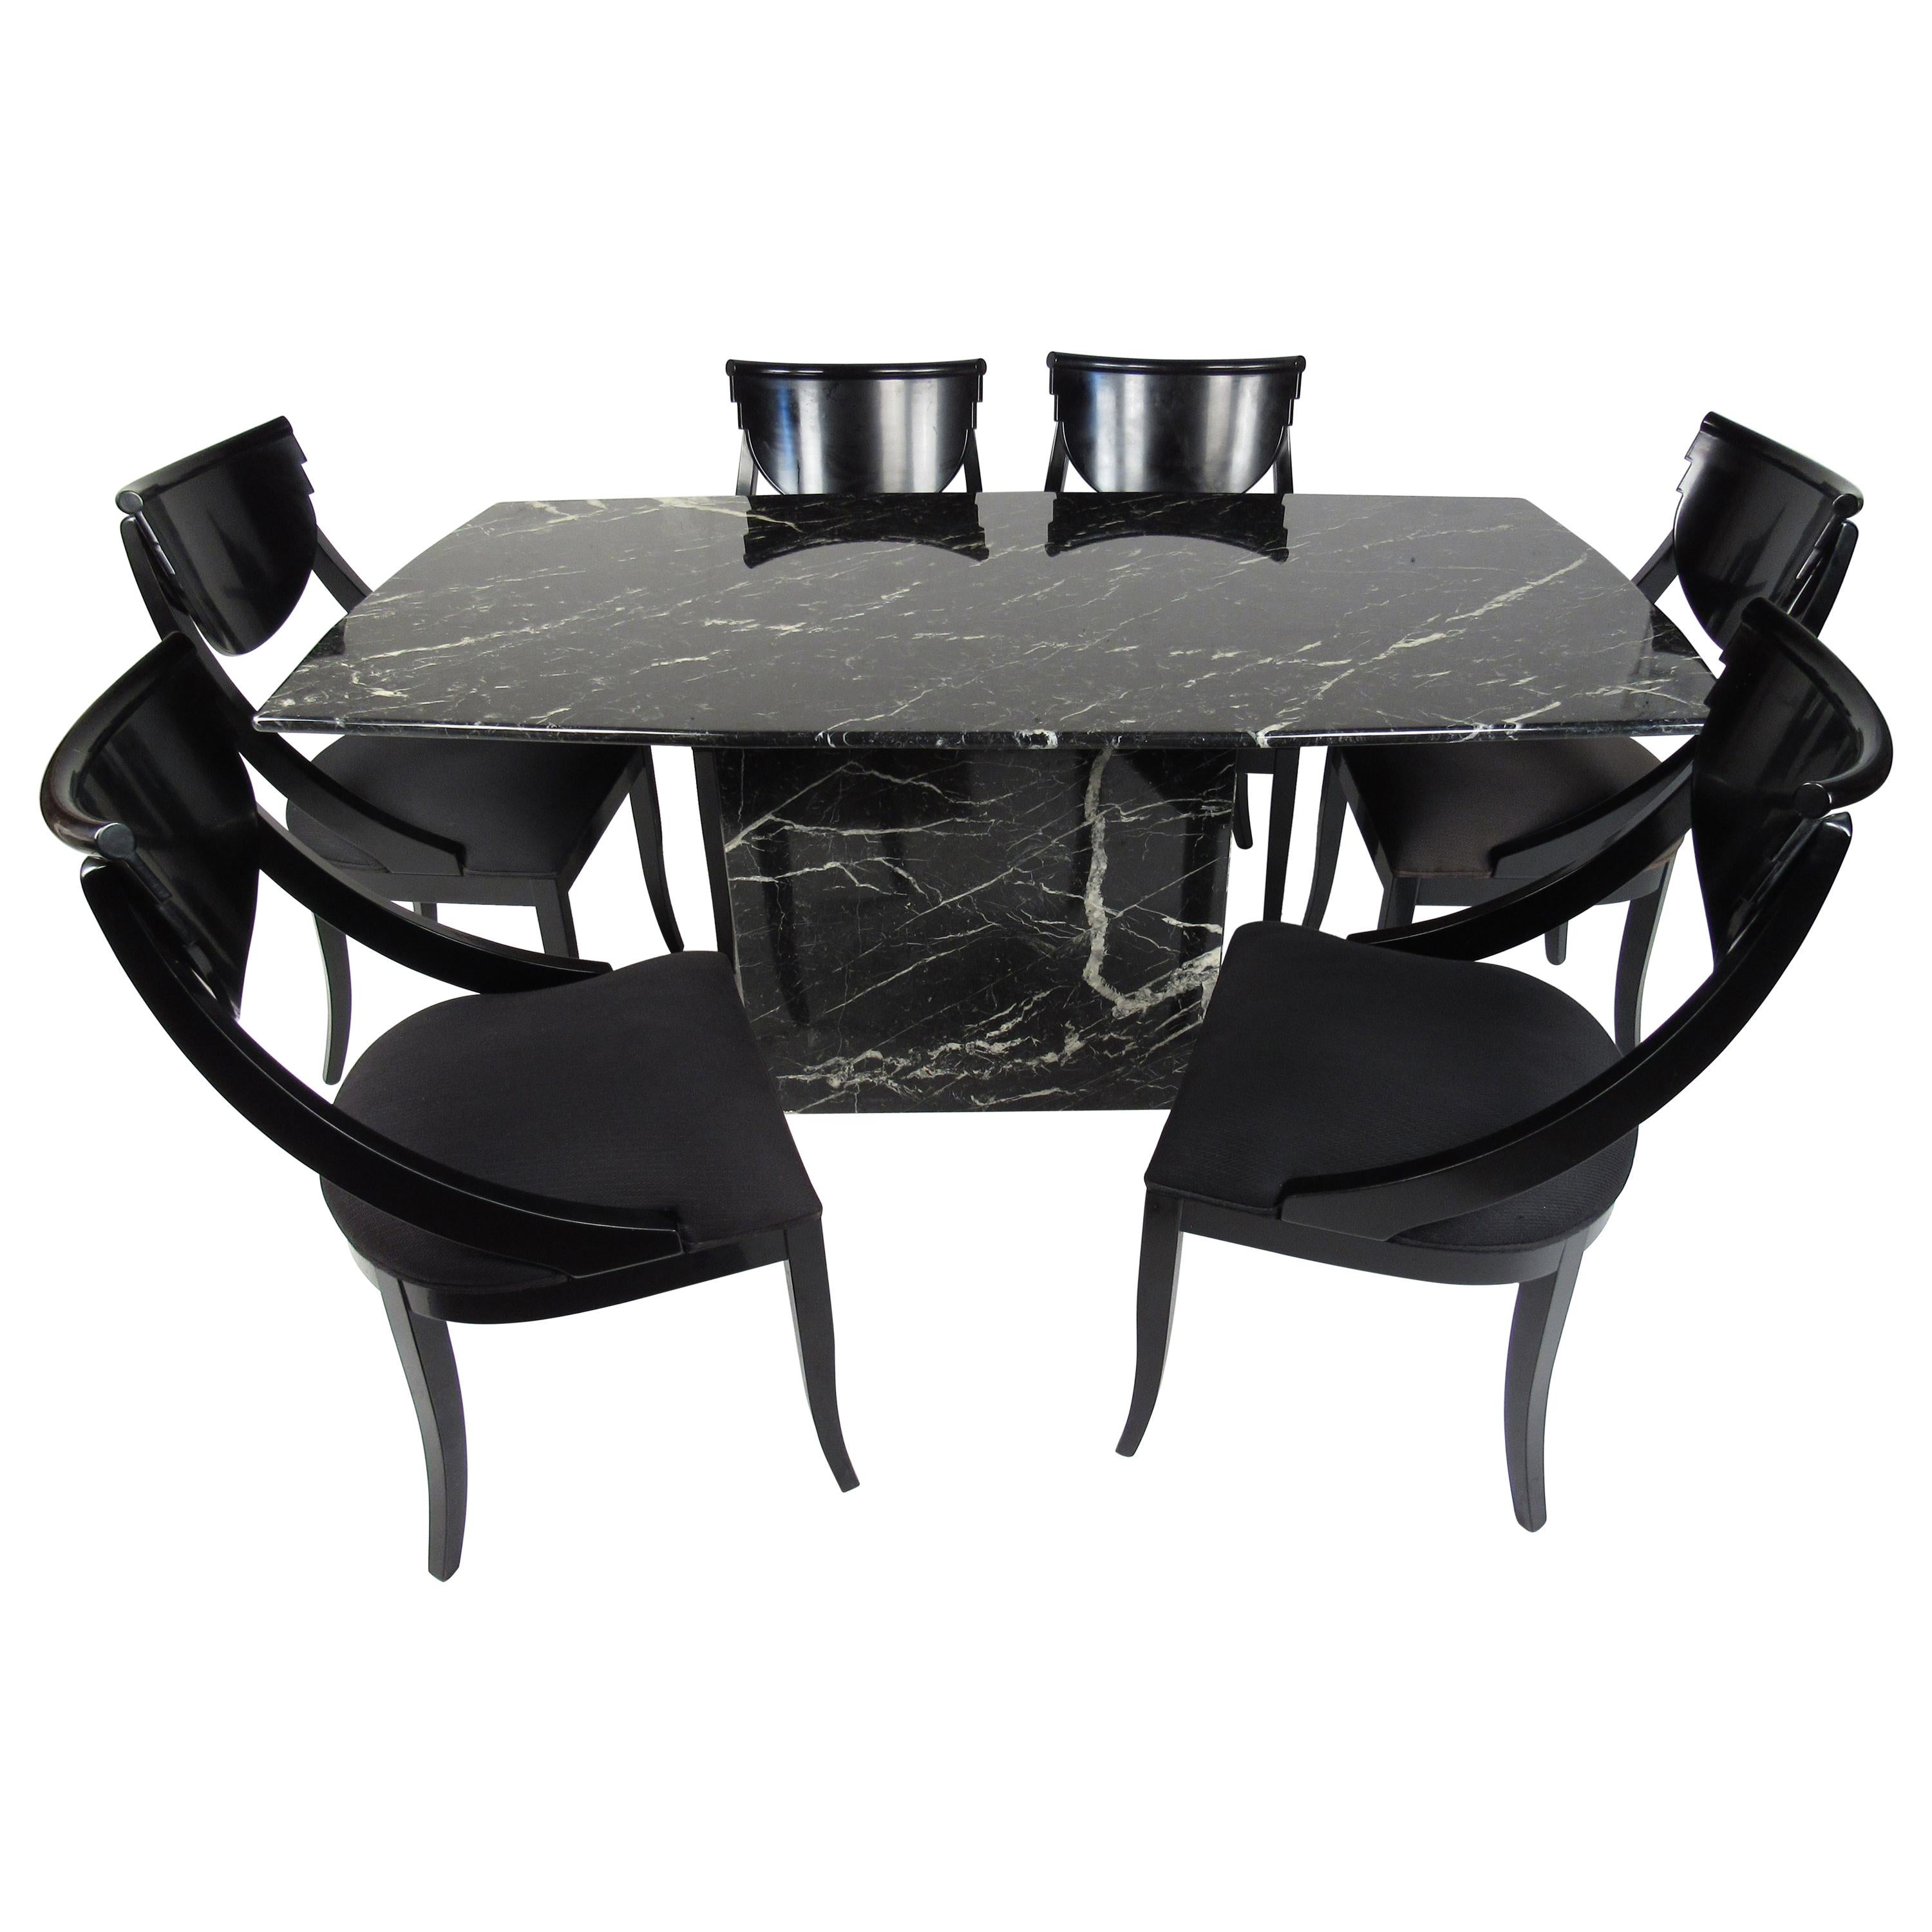 Impressive Italian Midcentury Dining Set with Marble-Top Table